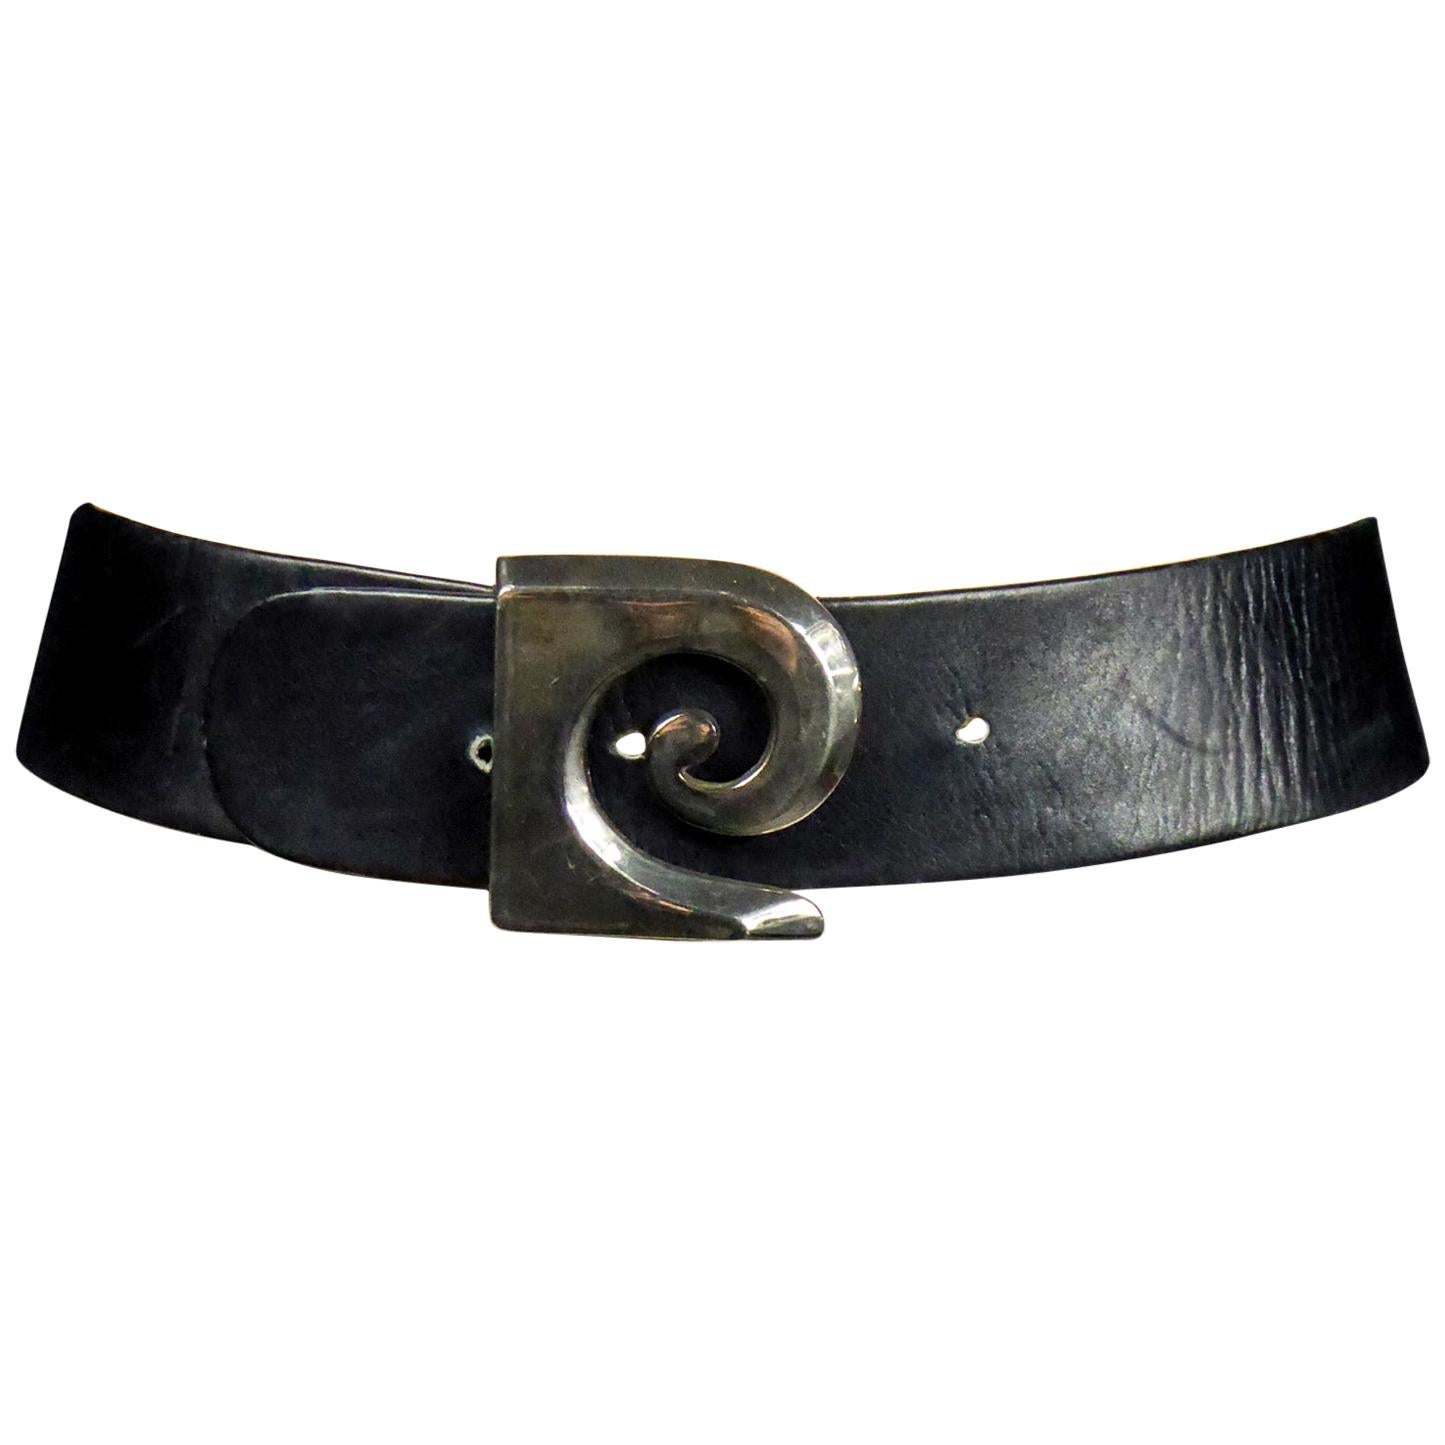 A French iconic Pierre Cardin Leather Belt Circa 1970/1980